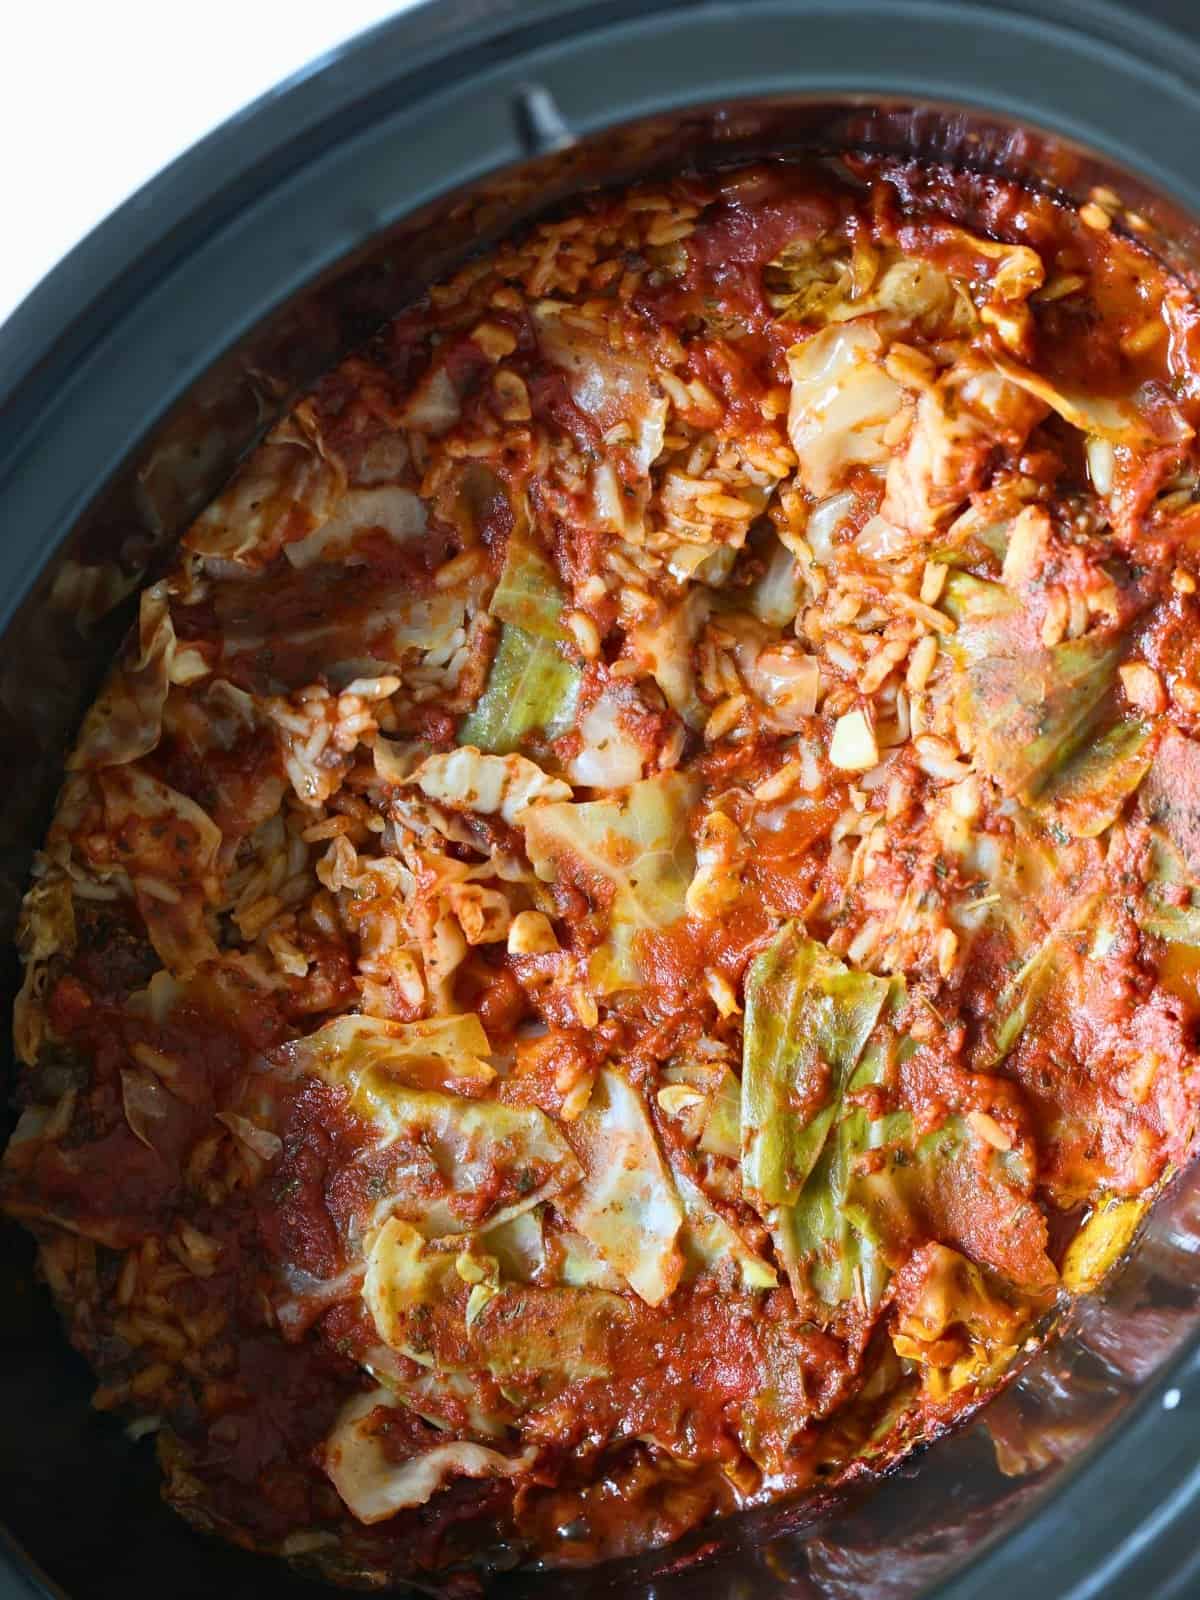 cooked cabbage casserole in a crockpot